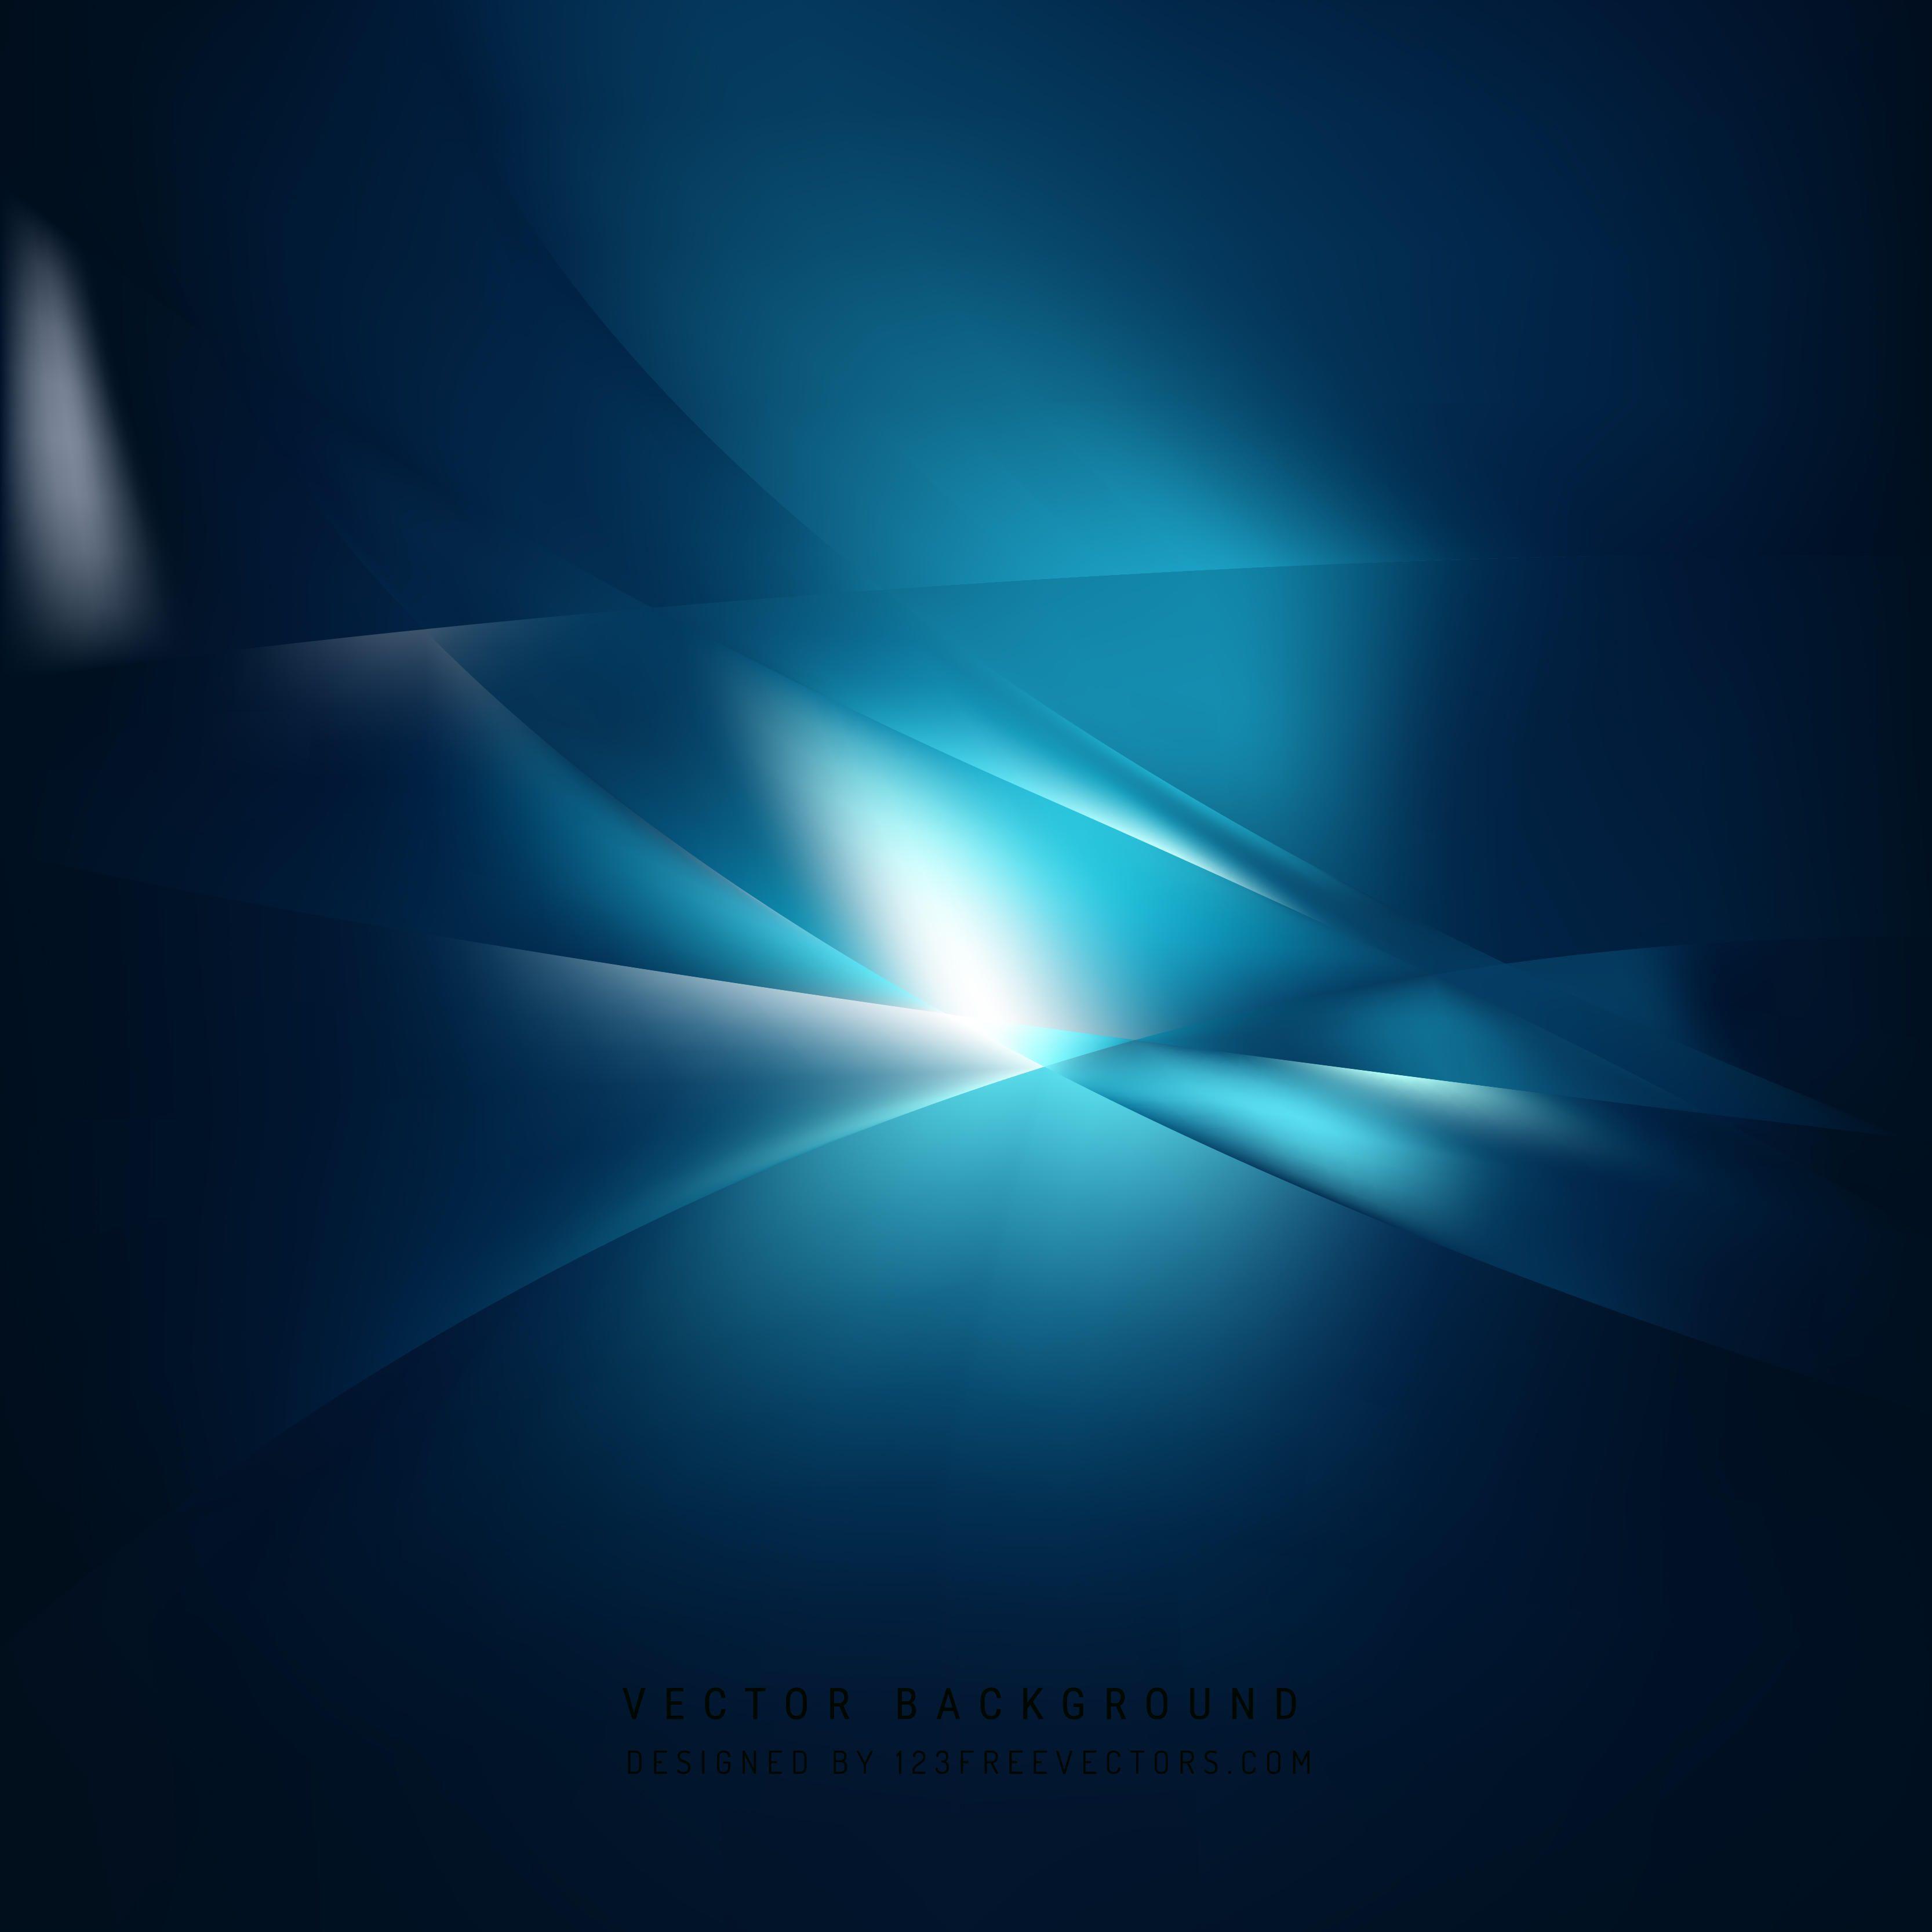 Dark Blue Abstract BackgroundFreevectors